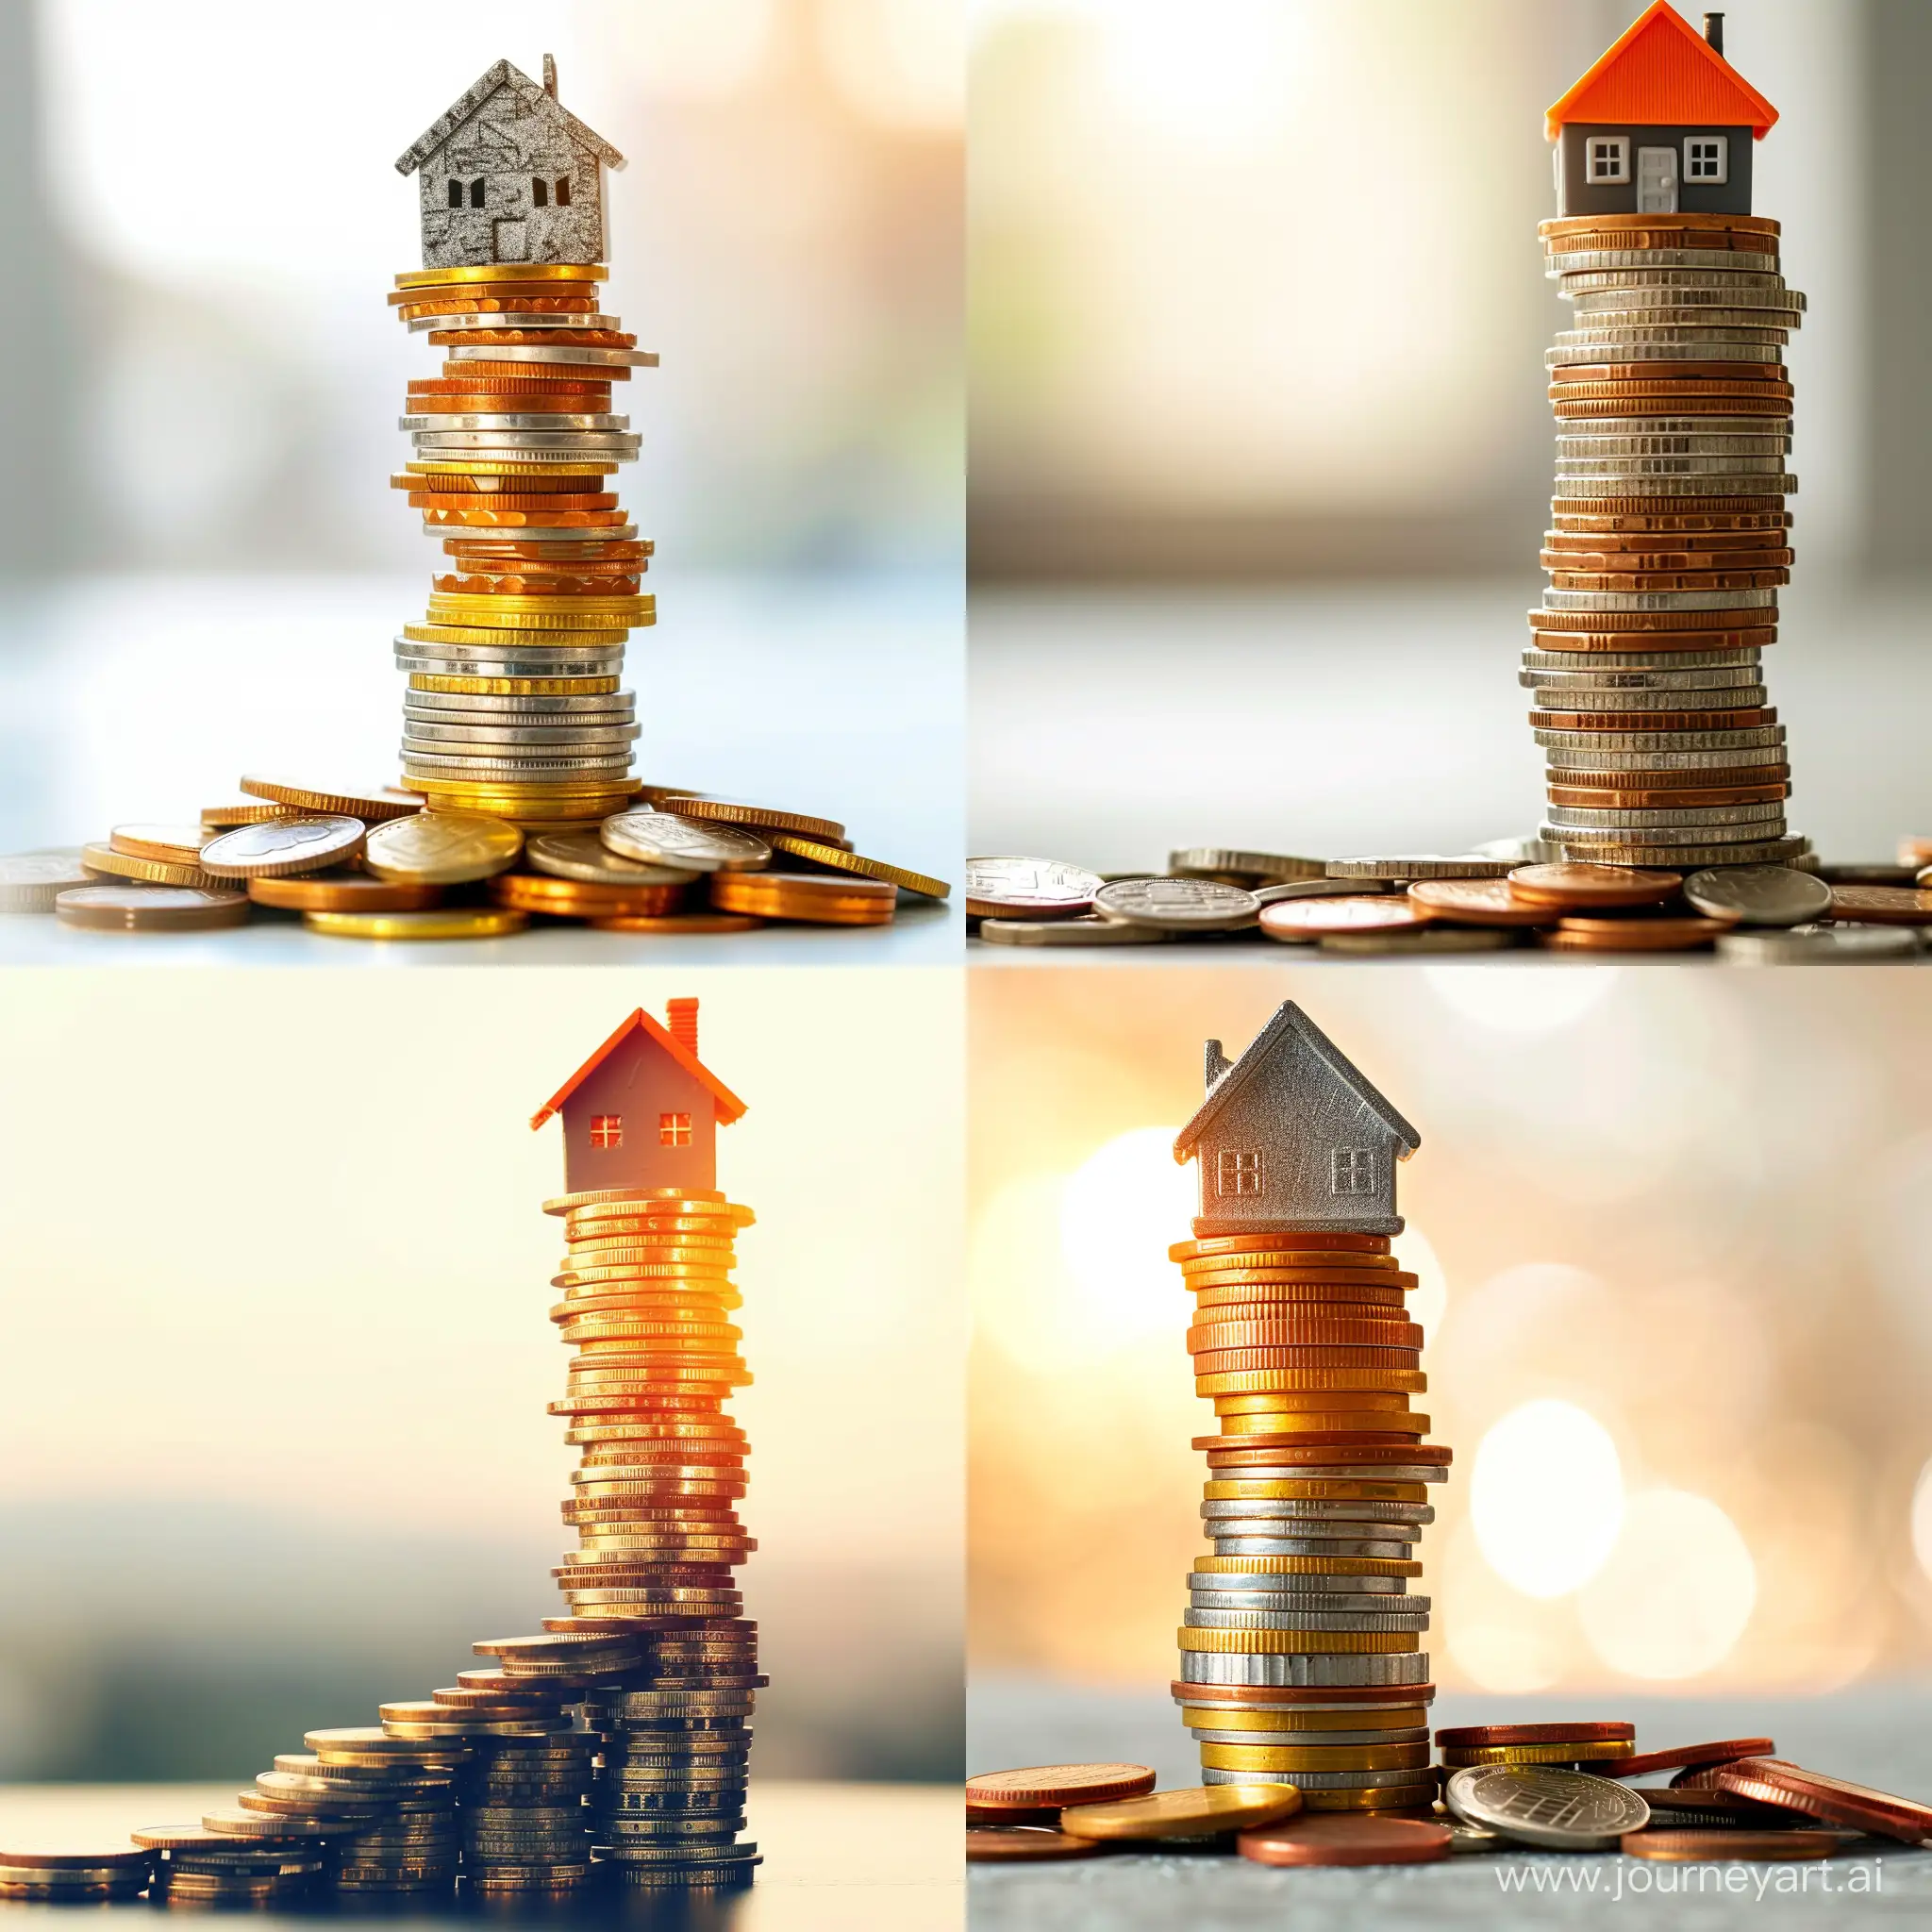 Stack-of-Coins-with-Charming-Miniature-House-on-Top